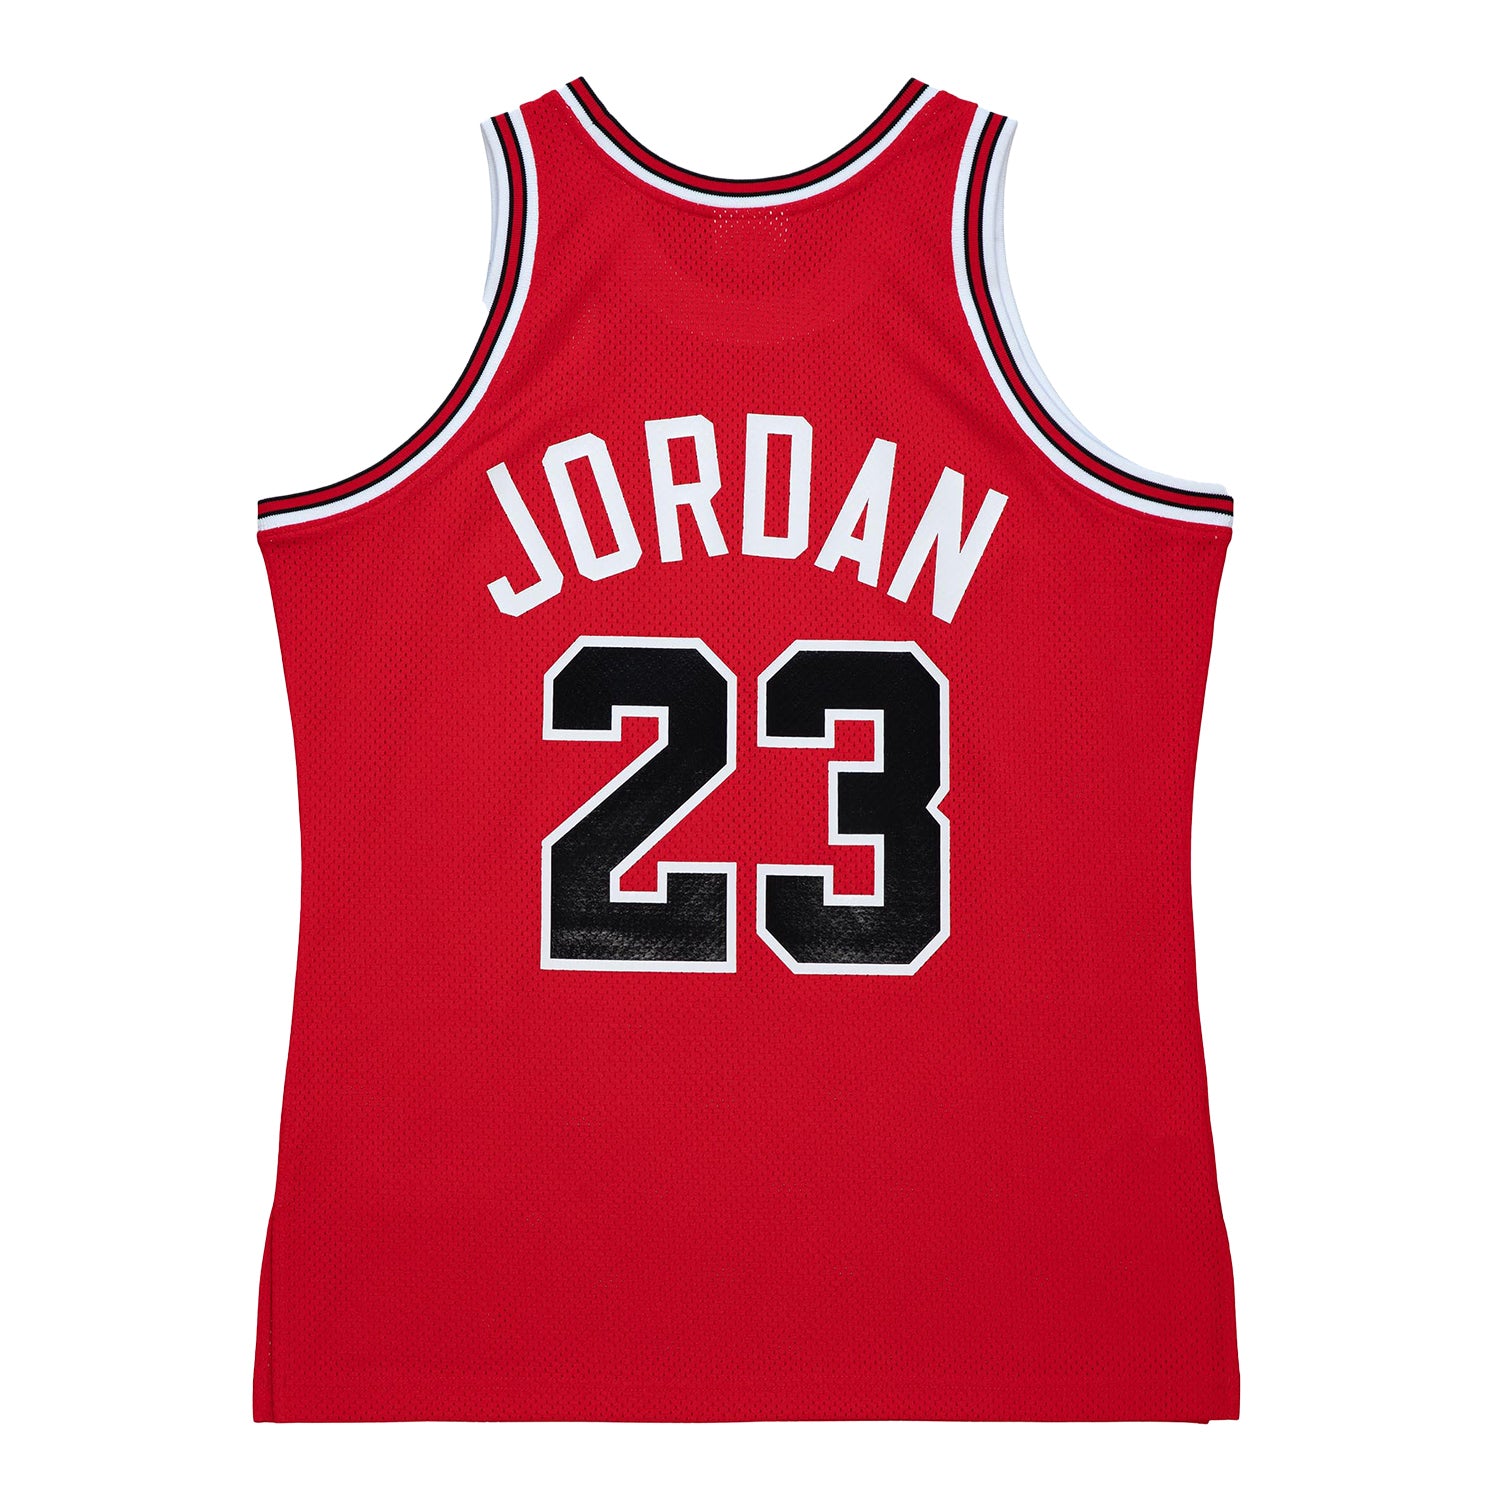 are mitchell and ness jerseys authentic